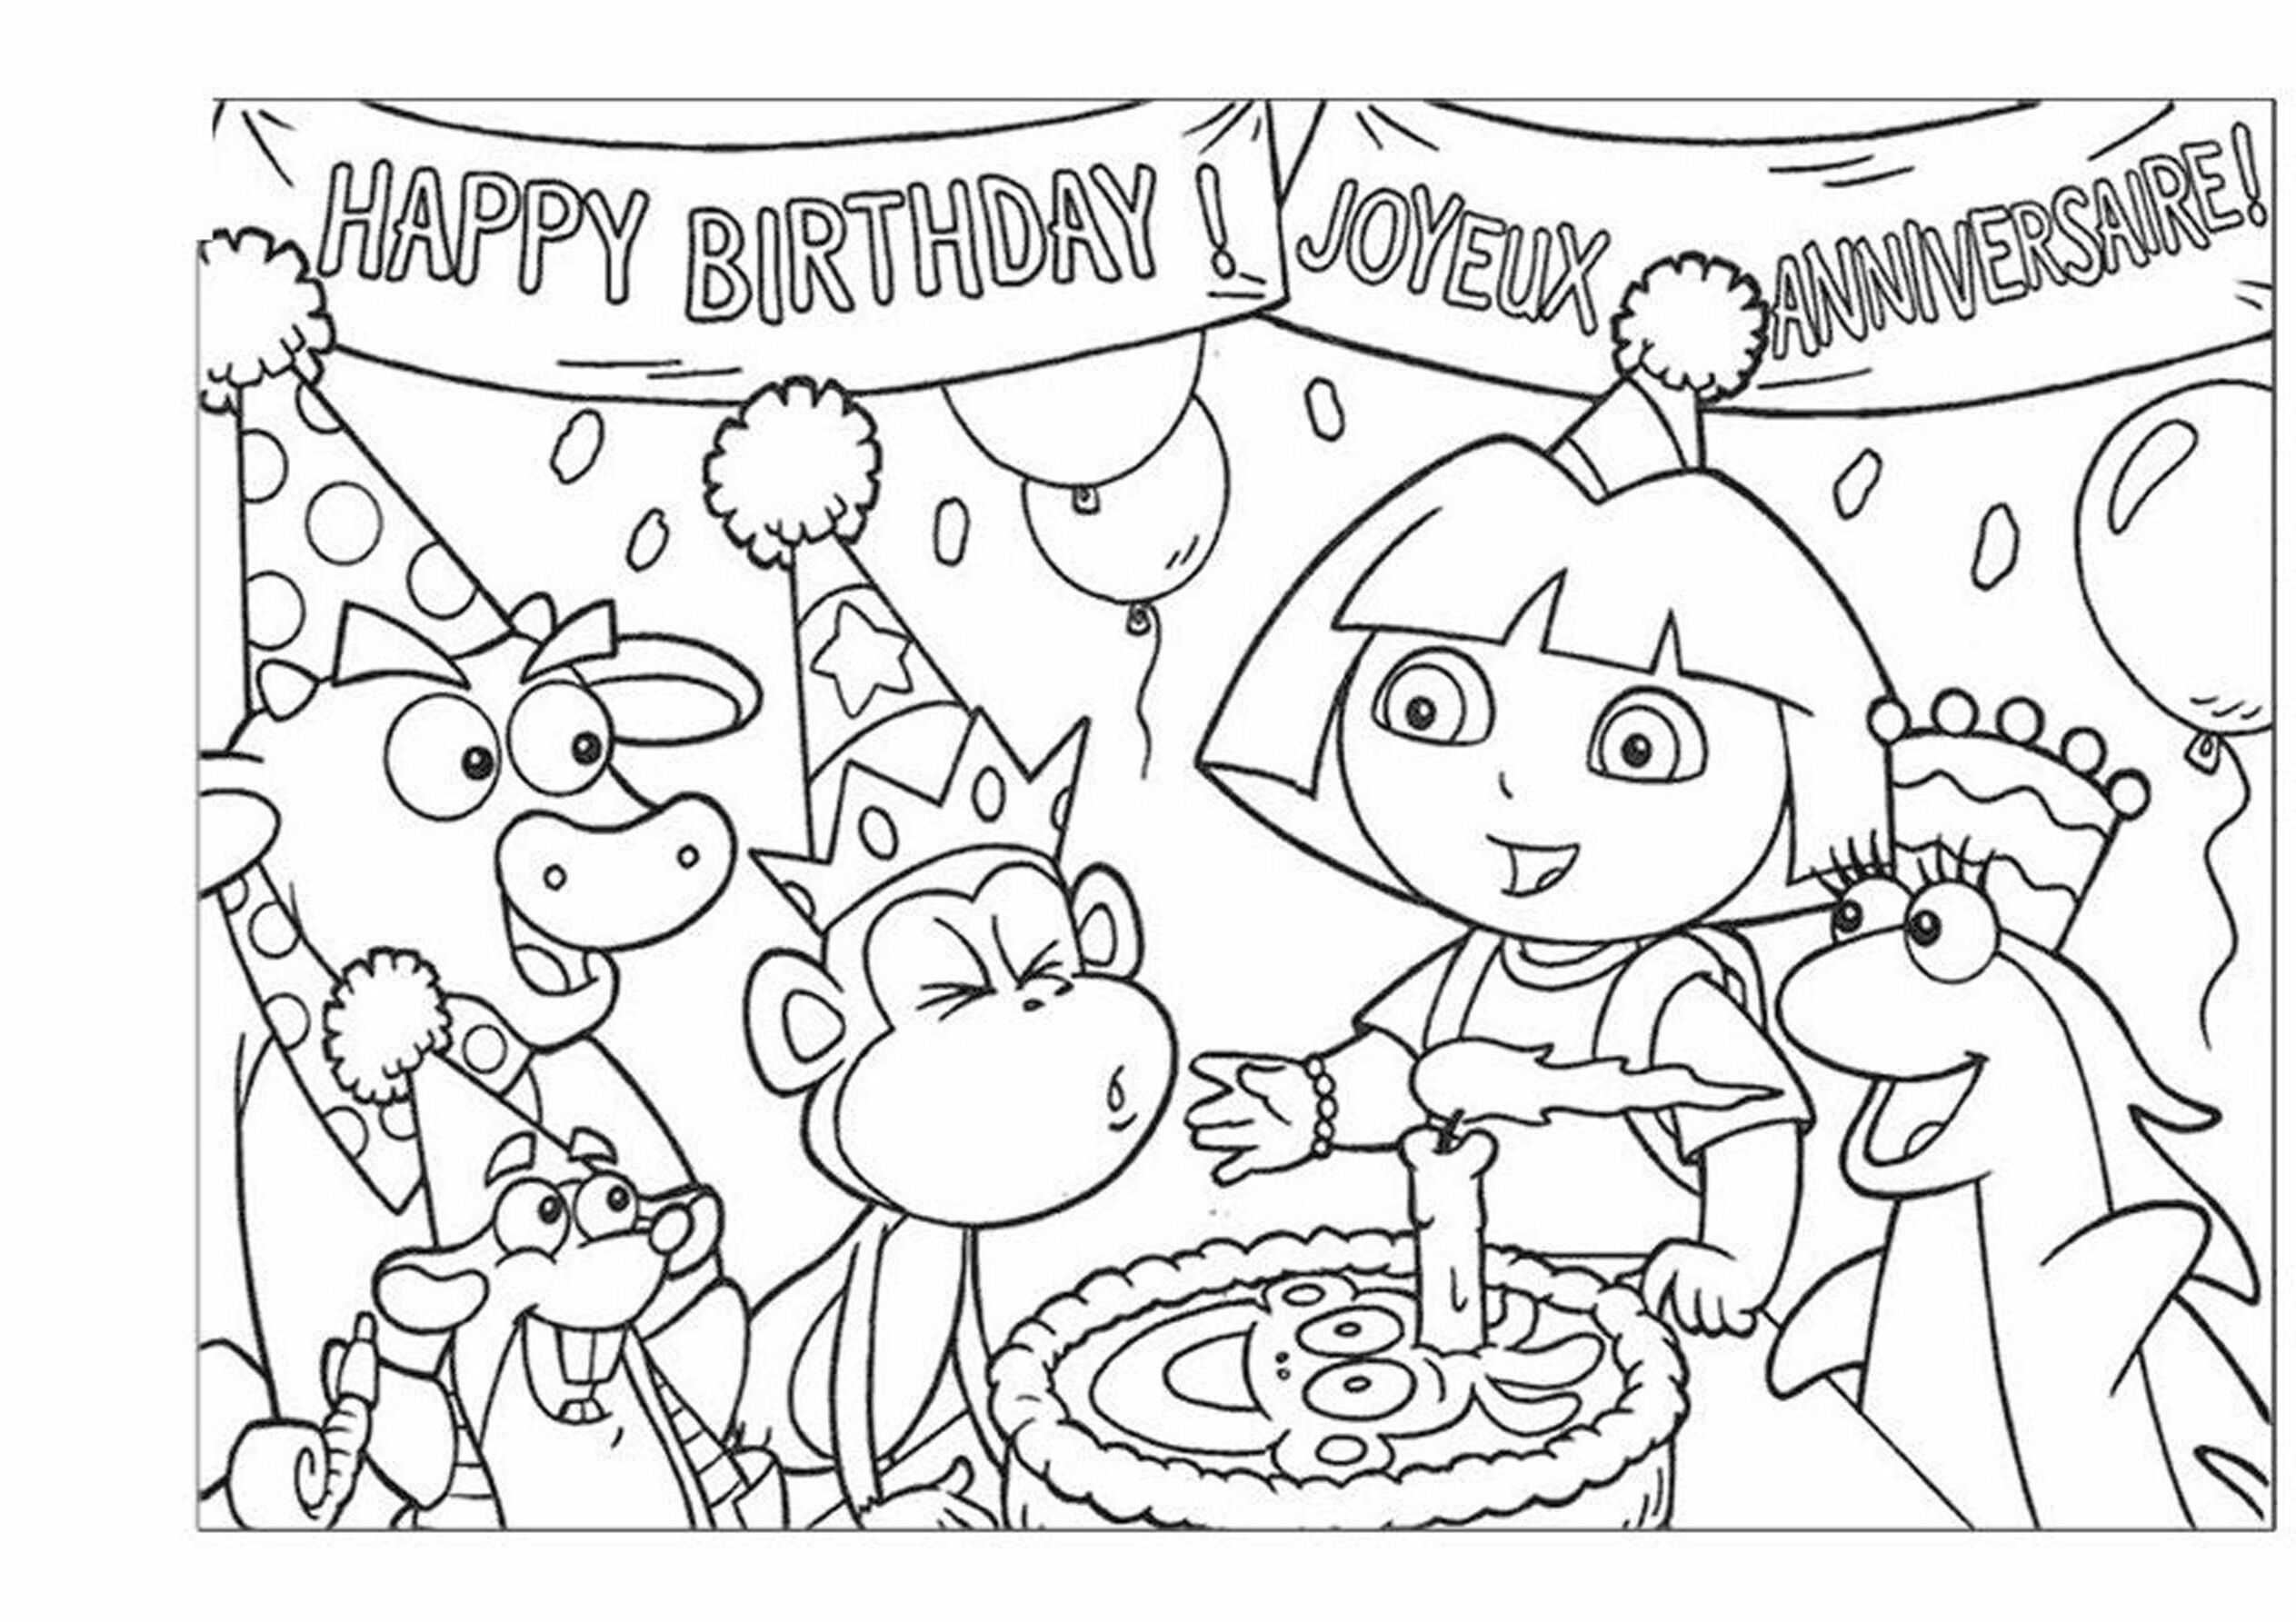 Animations A 2 Z - Coloring pages of Dora the explorer- Happy Birthday